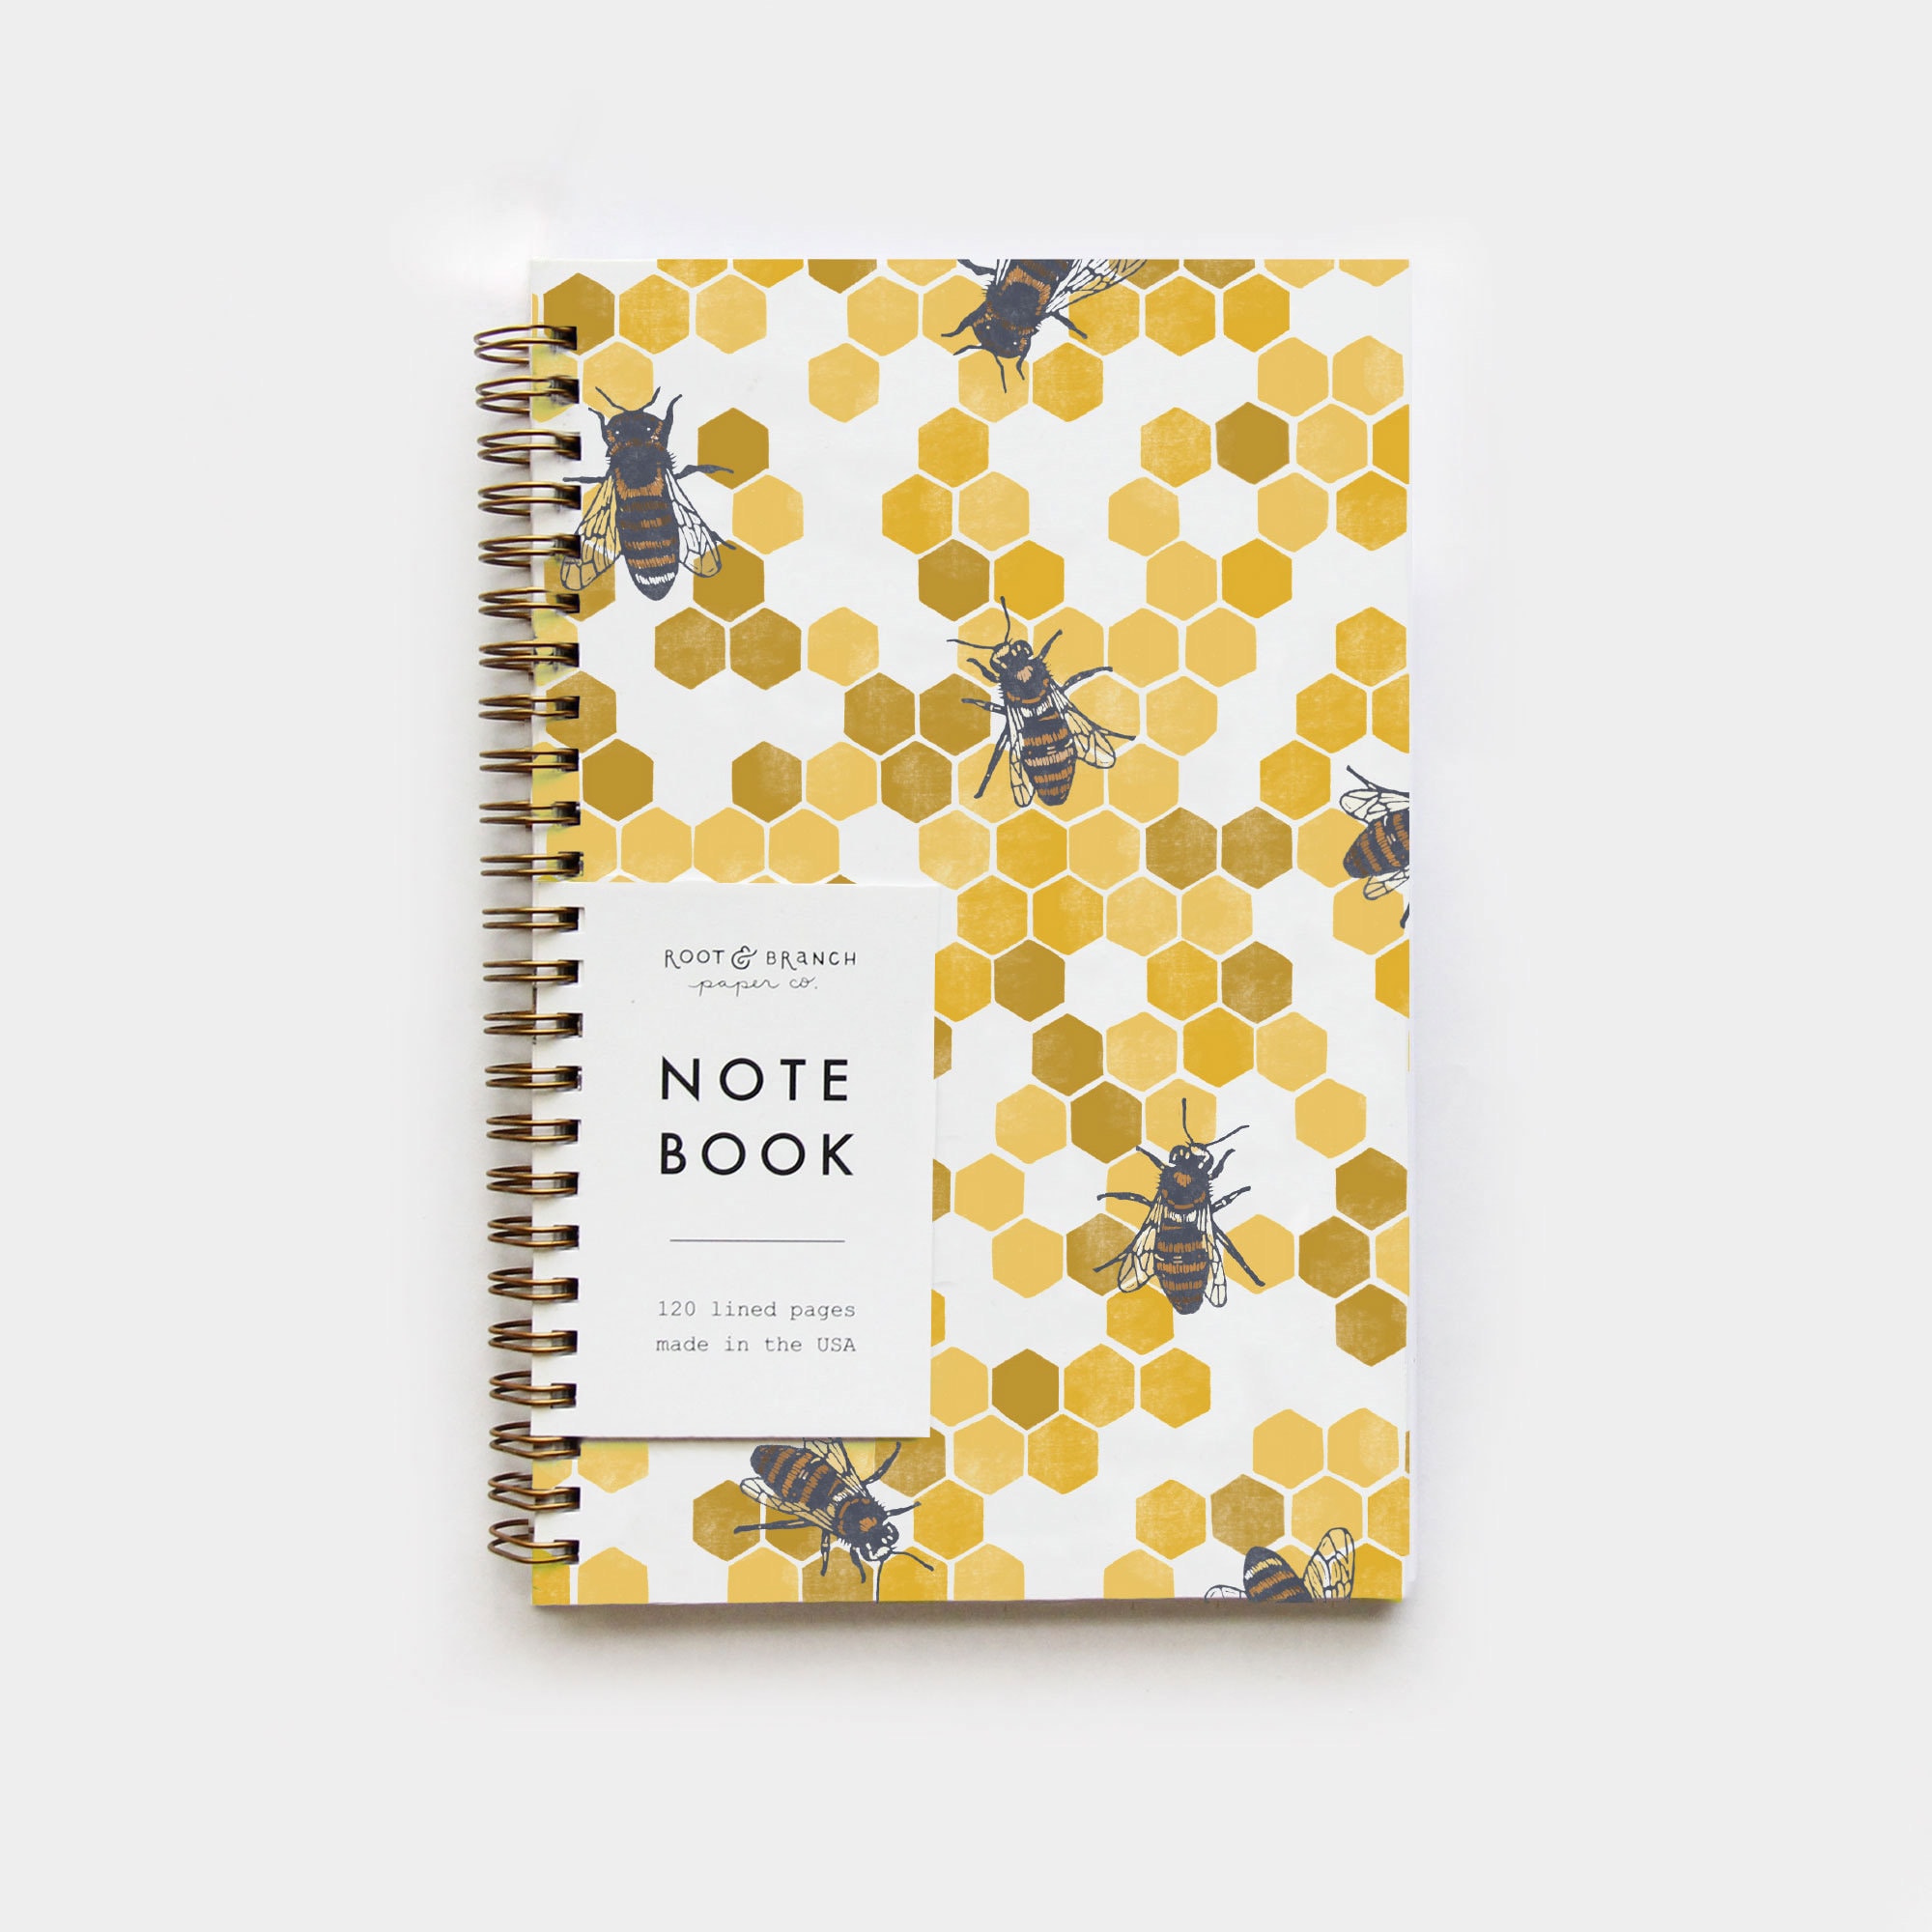 Black Cat Notebook Yellow Eyed Cat MEOW Gold Spiral Notebook Black Cat  Lover Notebook Gift for Writer Cute Cat Notebook Small Travel Notes 